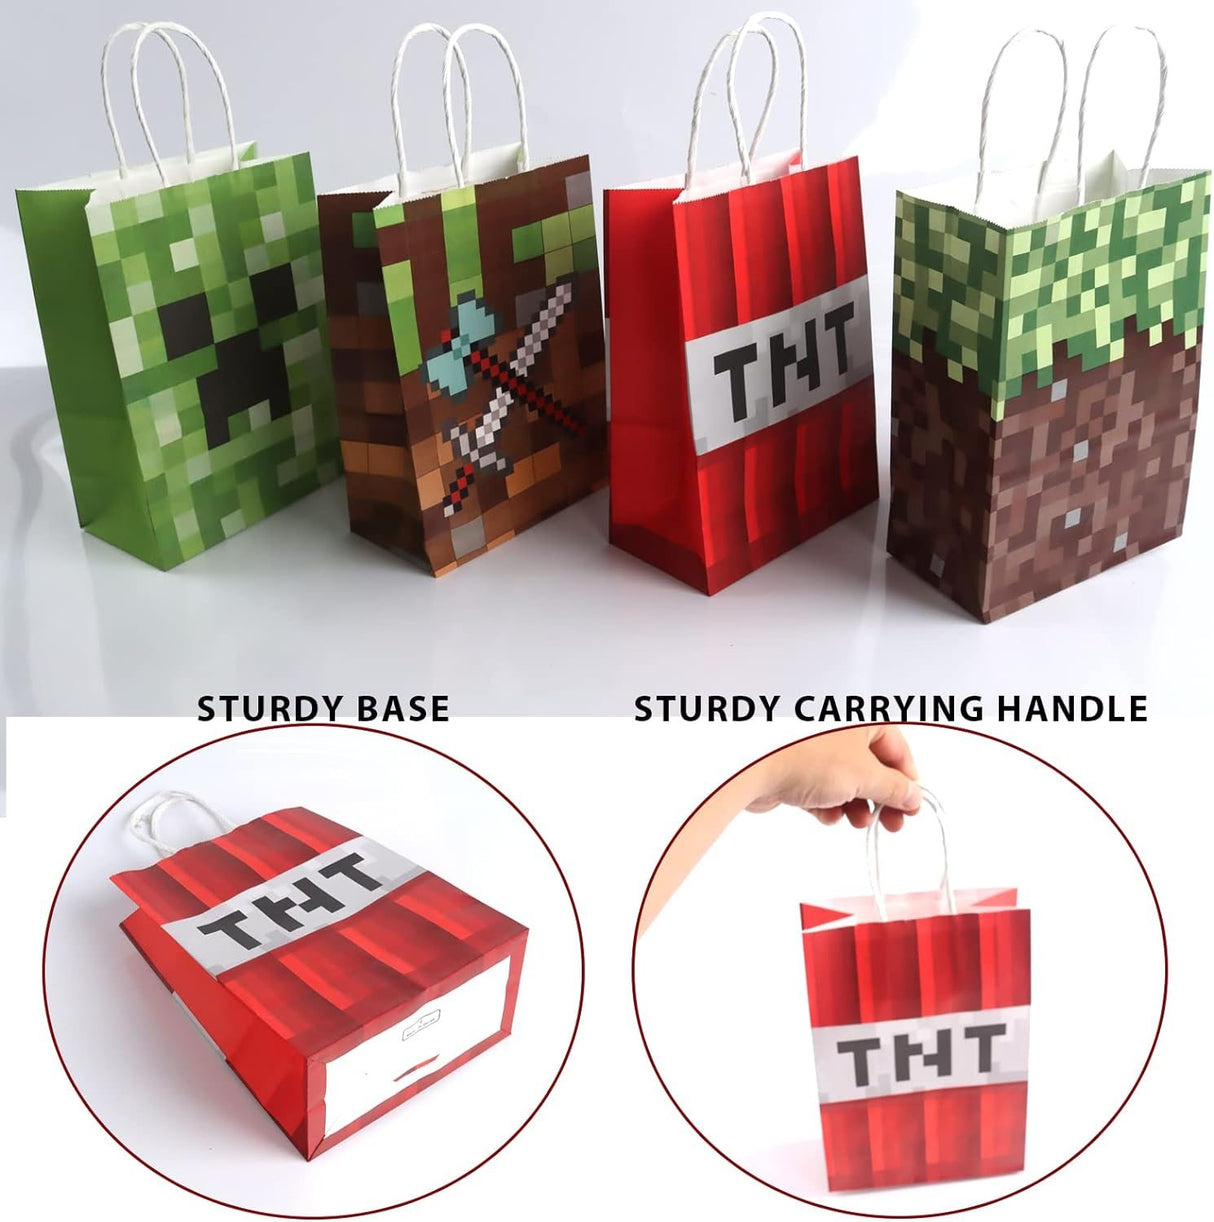 Stylish and Fun Pixel Themed Gift Bag for All Occasions